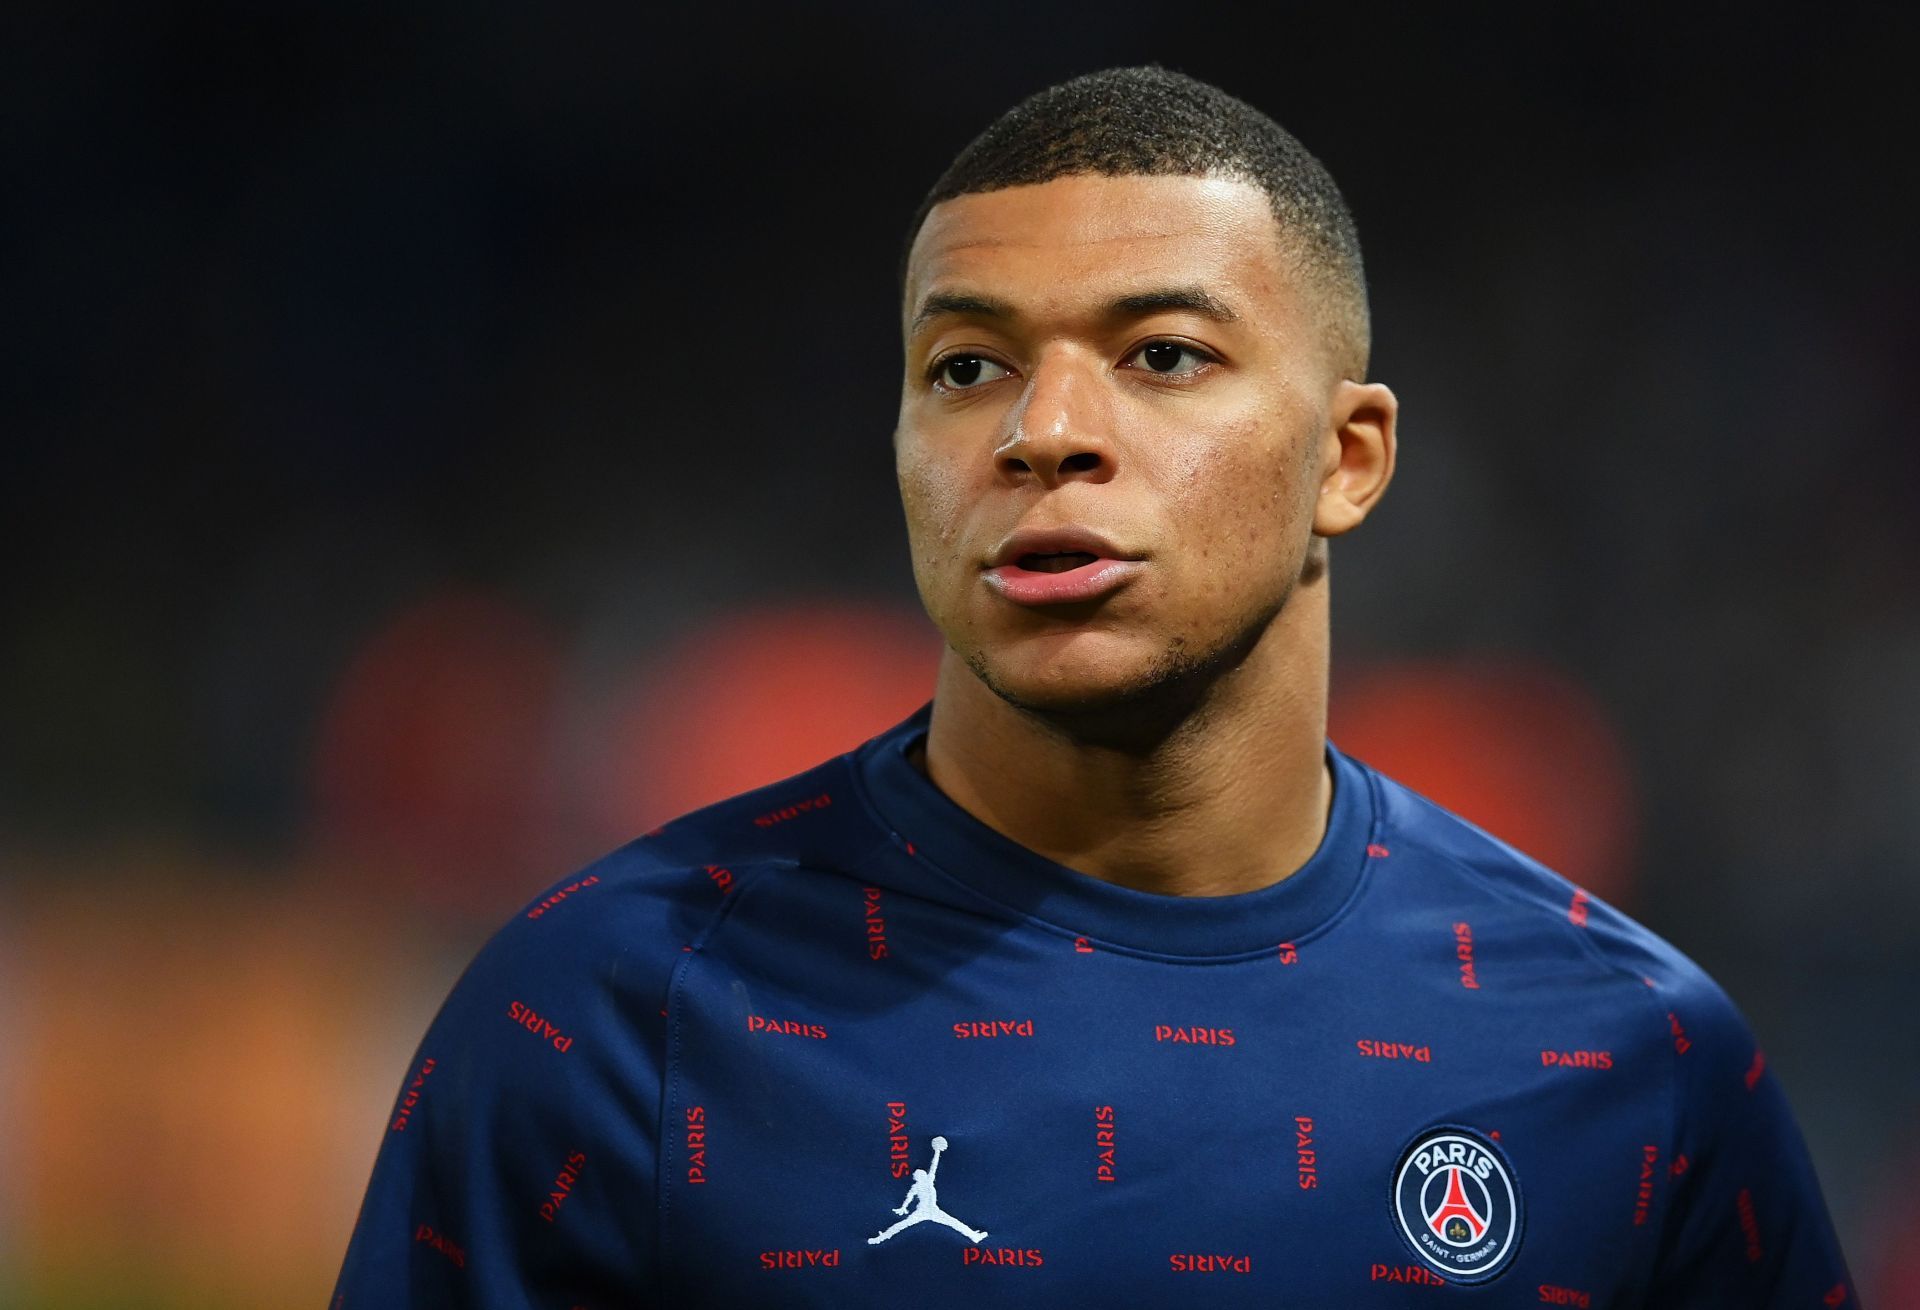 Zinedine Zidane&rsquo;s impending arrival at PSG could help the Ligue 1 giants hold on to Kylian Mbappe.